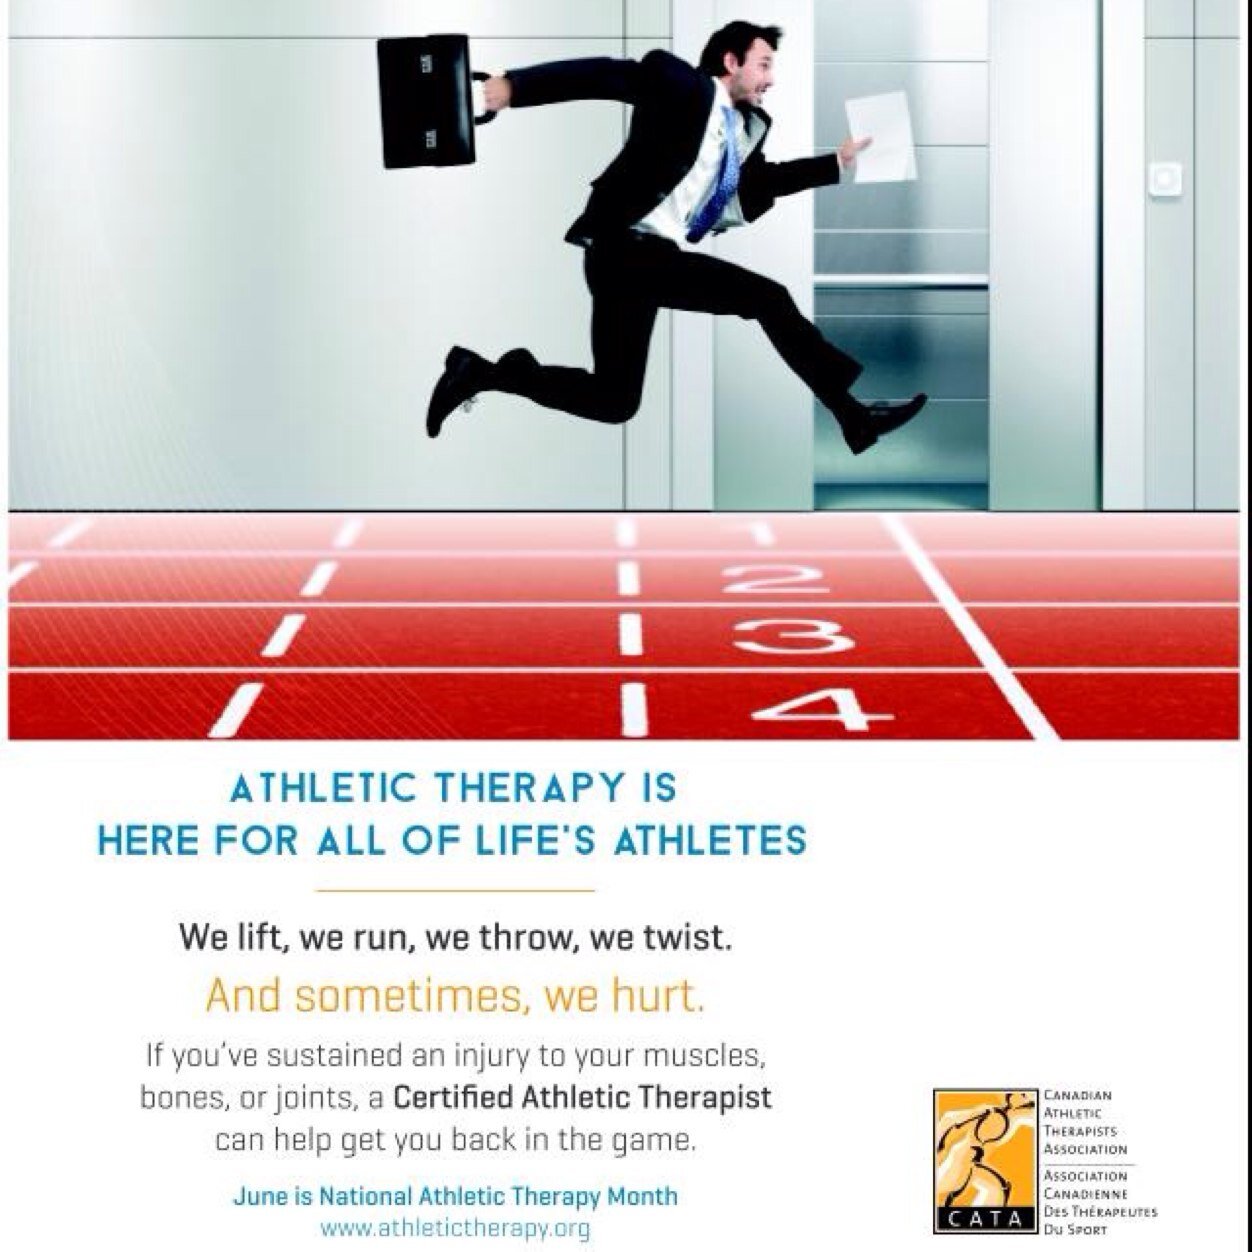 The Alberta Athletic Therapists Association represents all CAT(C) and certification candidates in AB. #AT4All